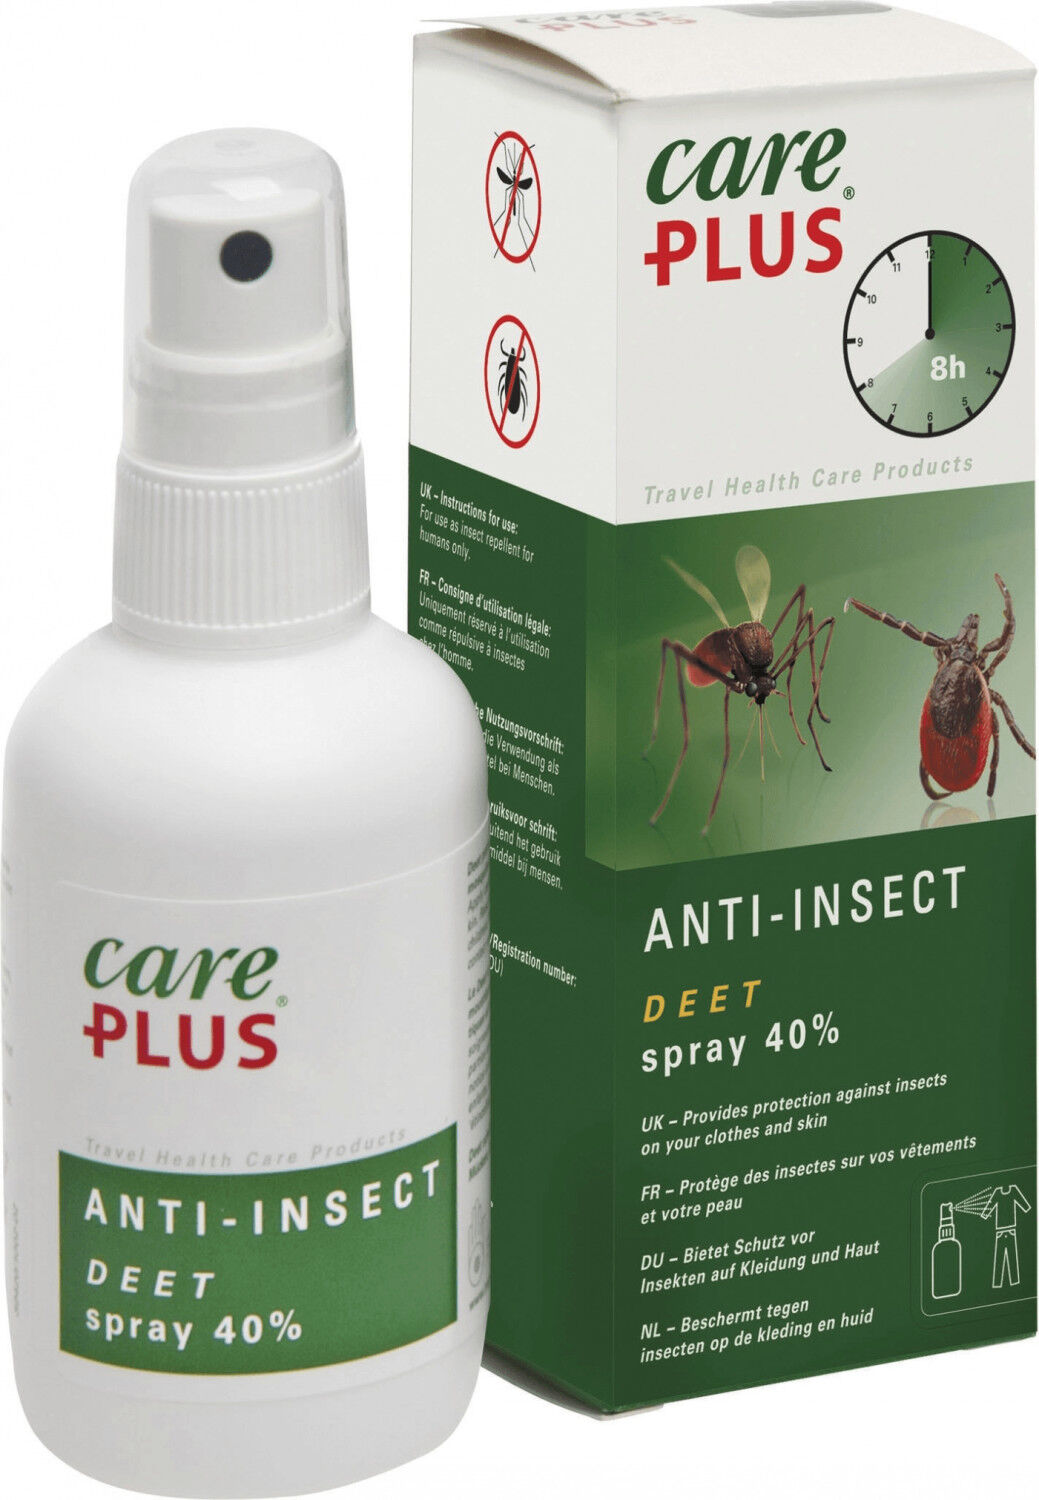 Care Plus Anti-Insect - Deet spray 40% - Anti-insectes | Hardloop